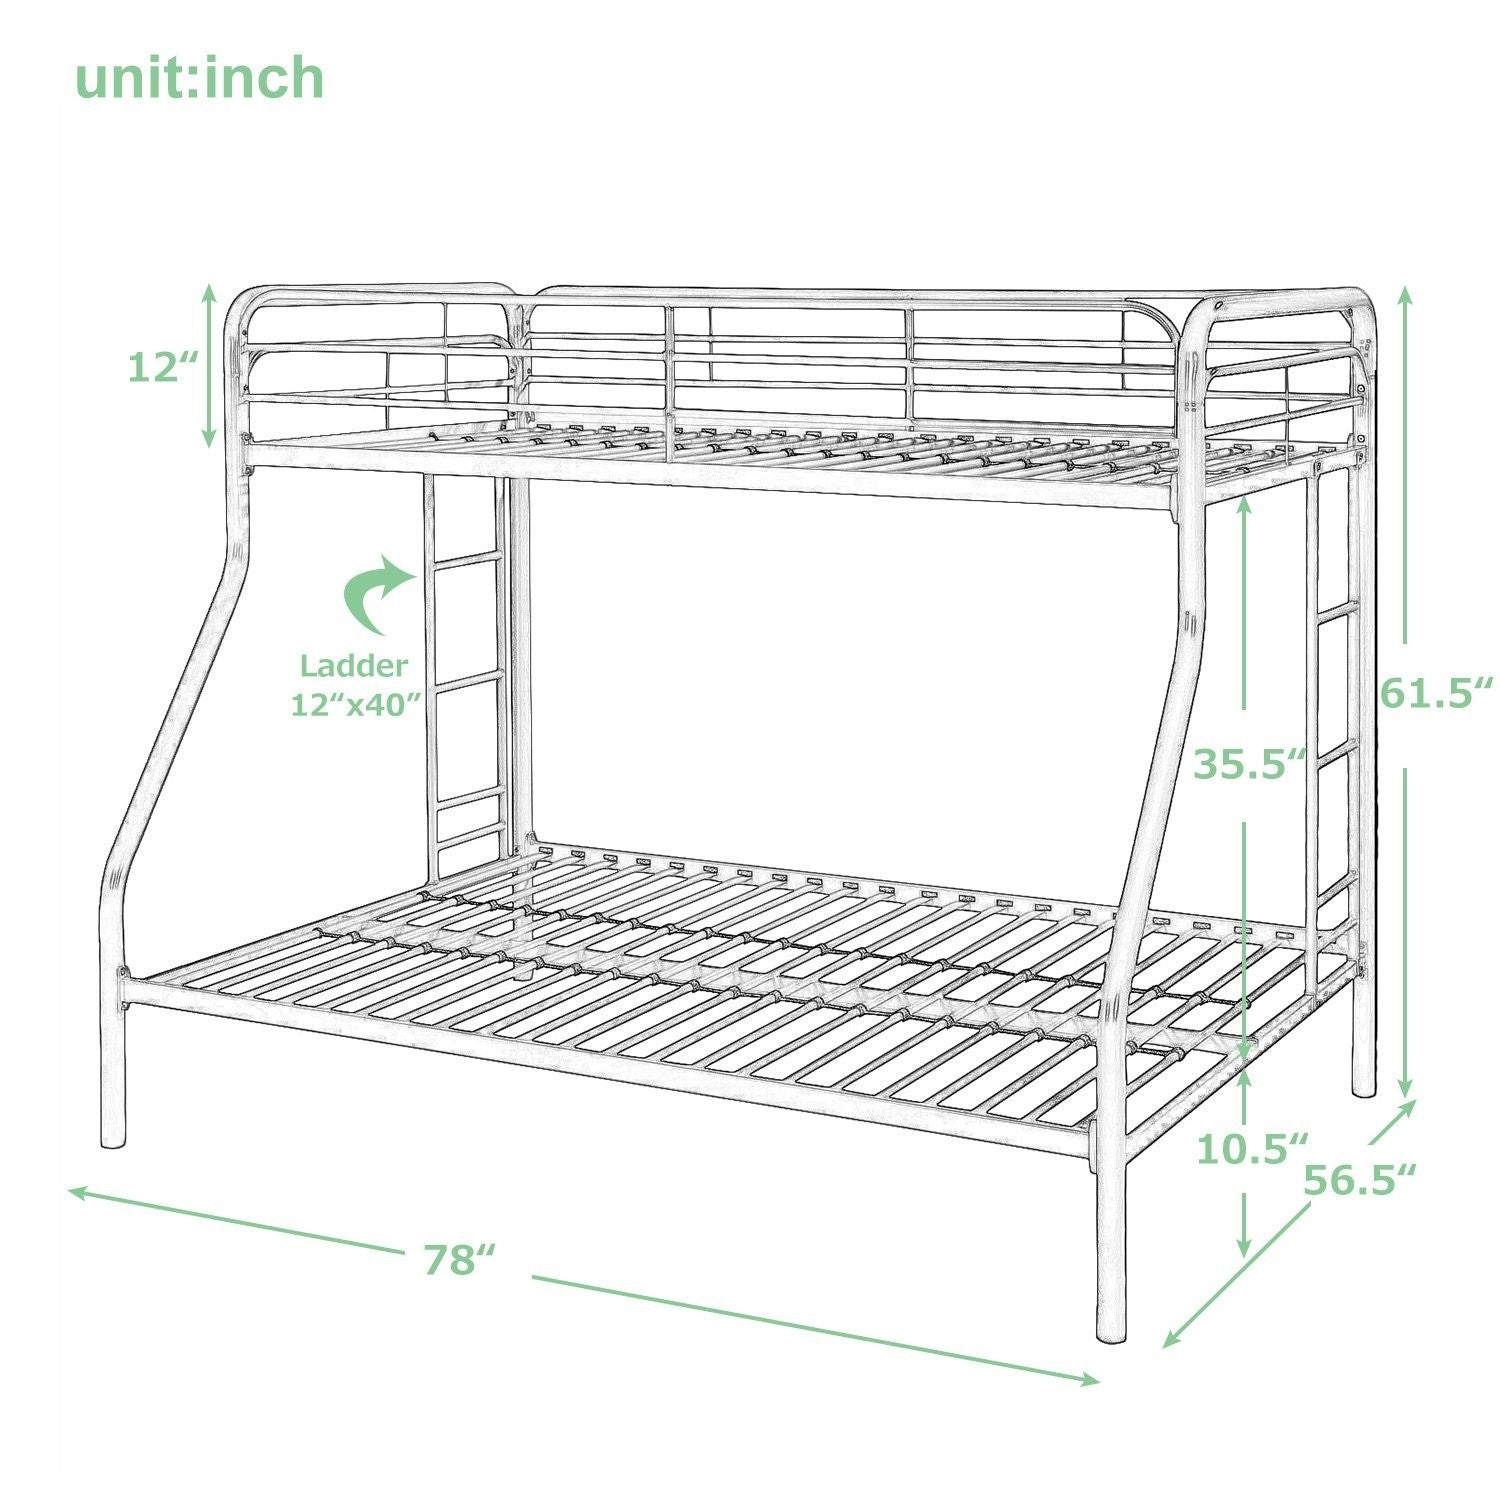 White Twin Over Full Metal Bunk Bed